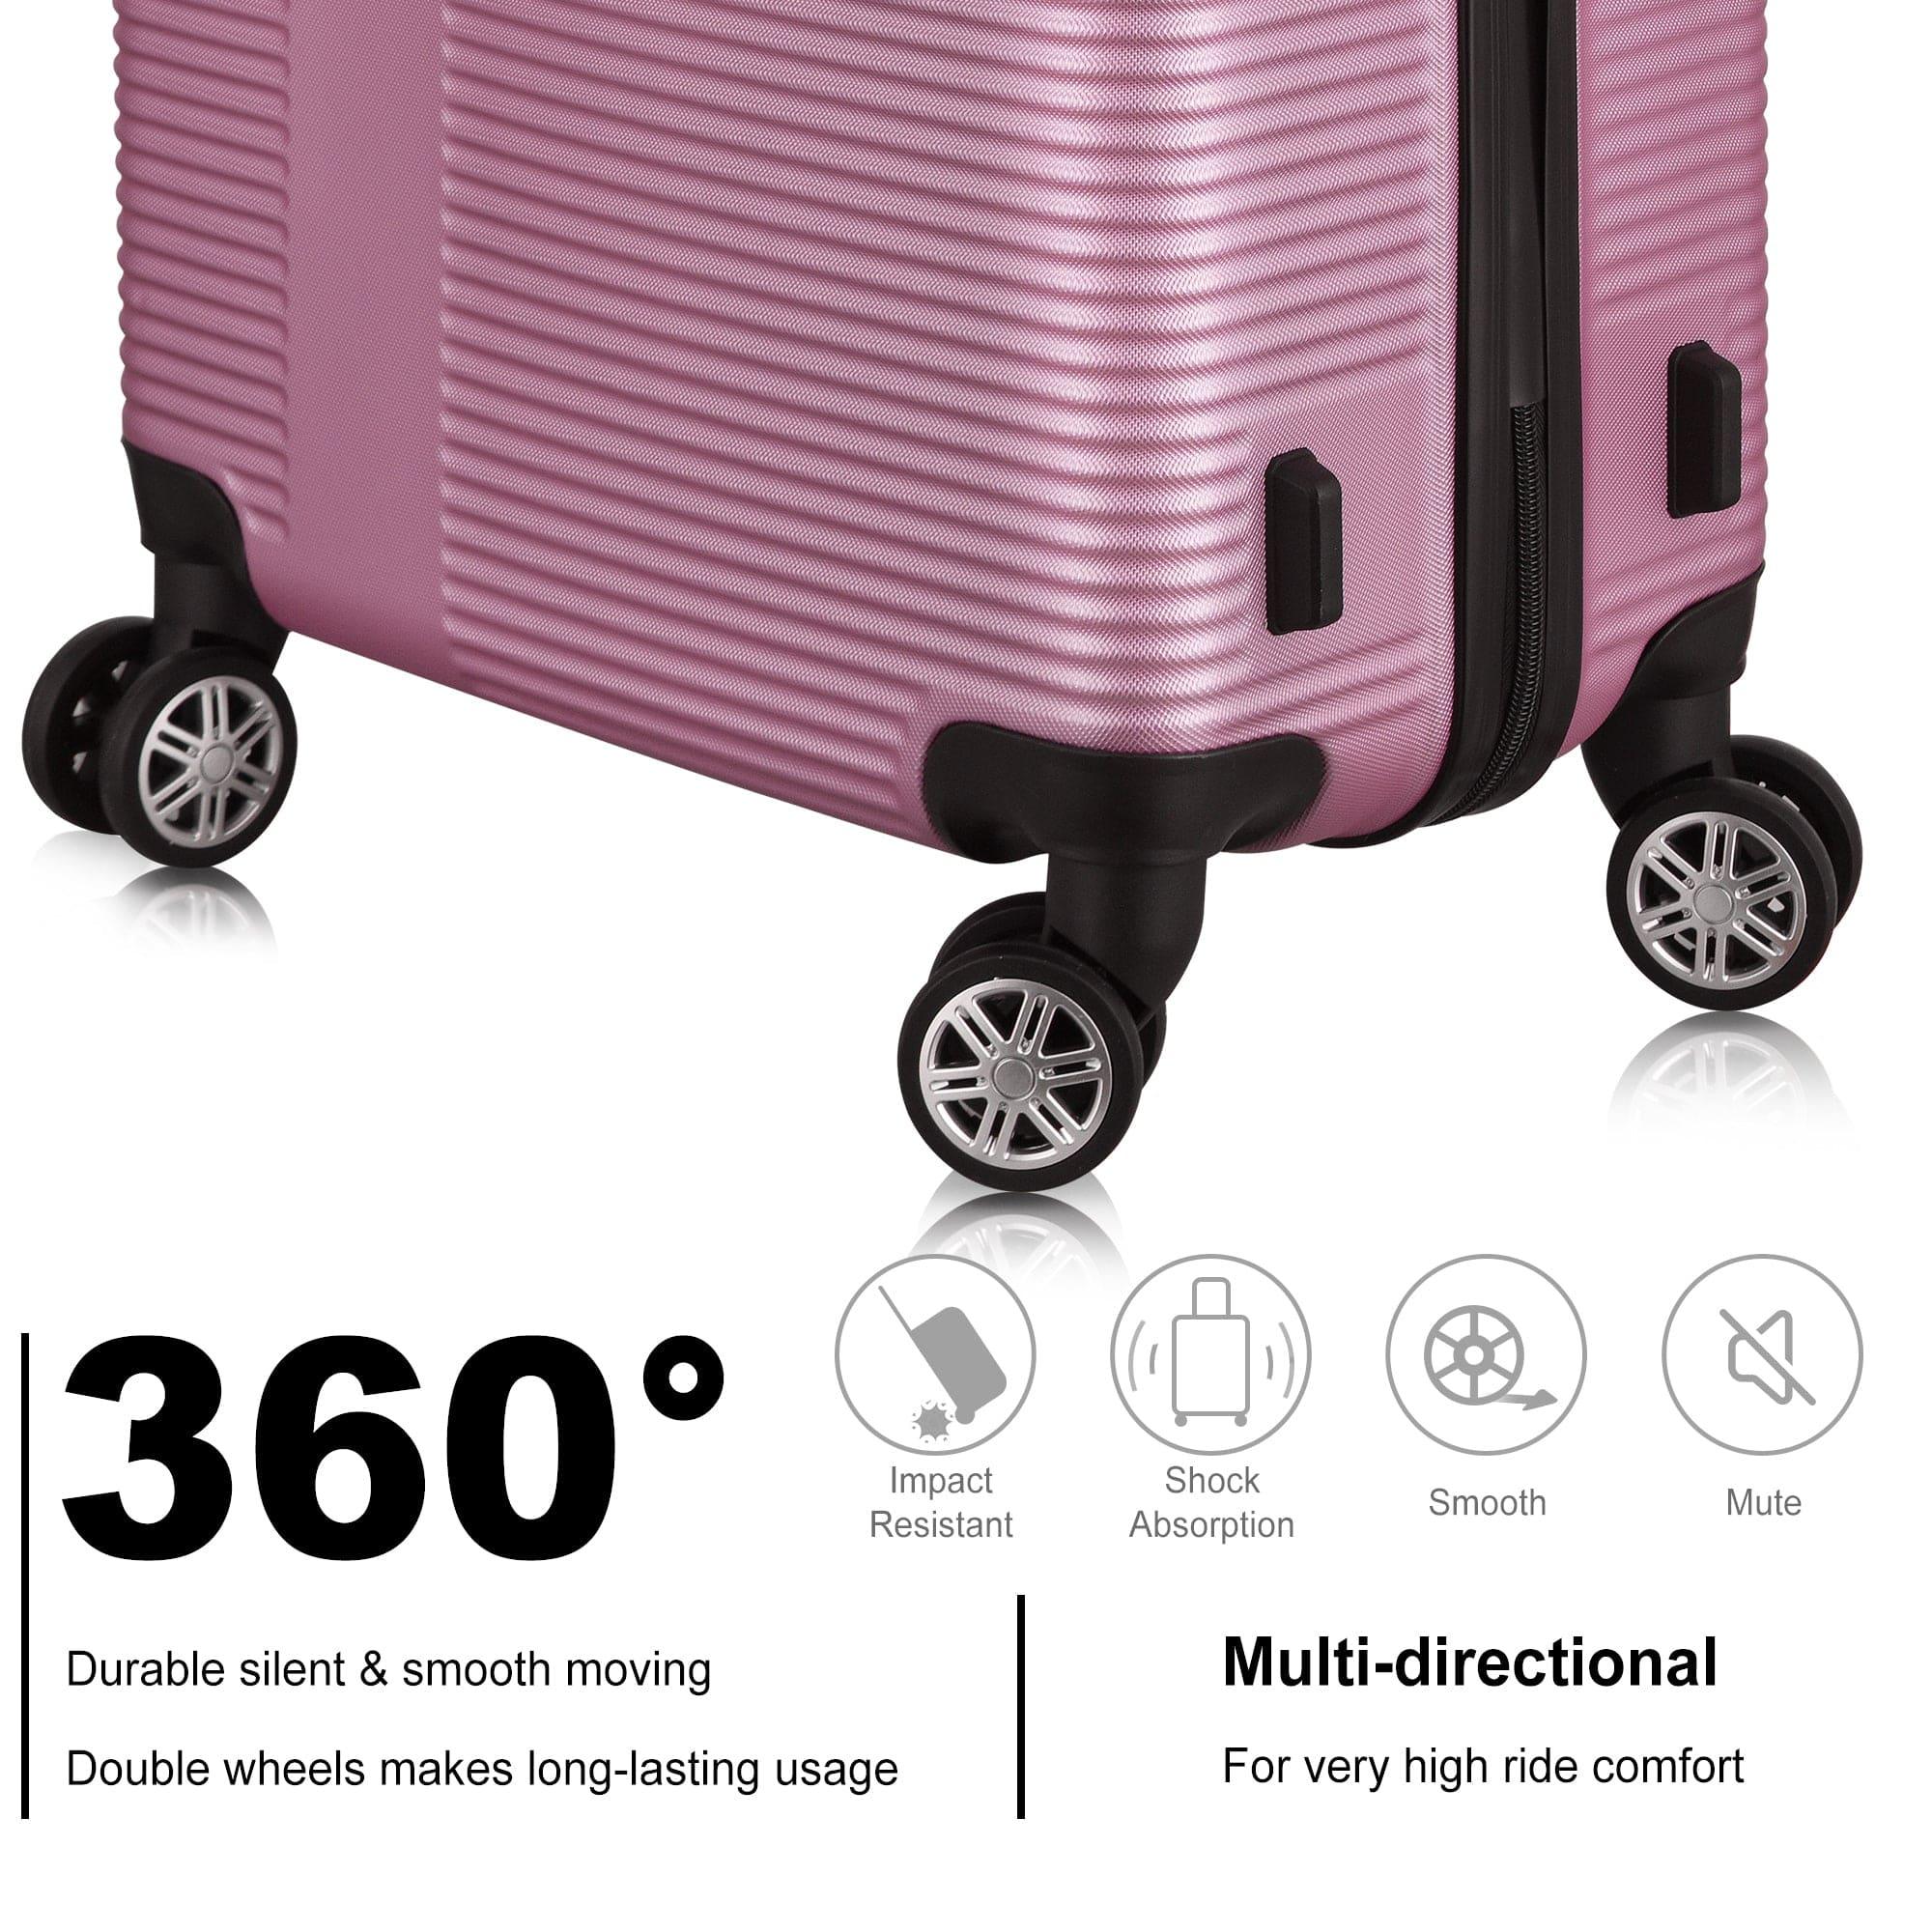 Shop 3 Piece Luggage with TSA Lock ABS, Durable Luggage Set, Lightweight Suitcase with Hooks, Spinner Wheels Cross Stripe Luggage Sets 20in/24in/28in Mademoiselle Home Decor